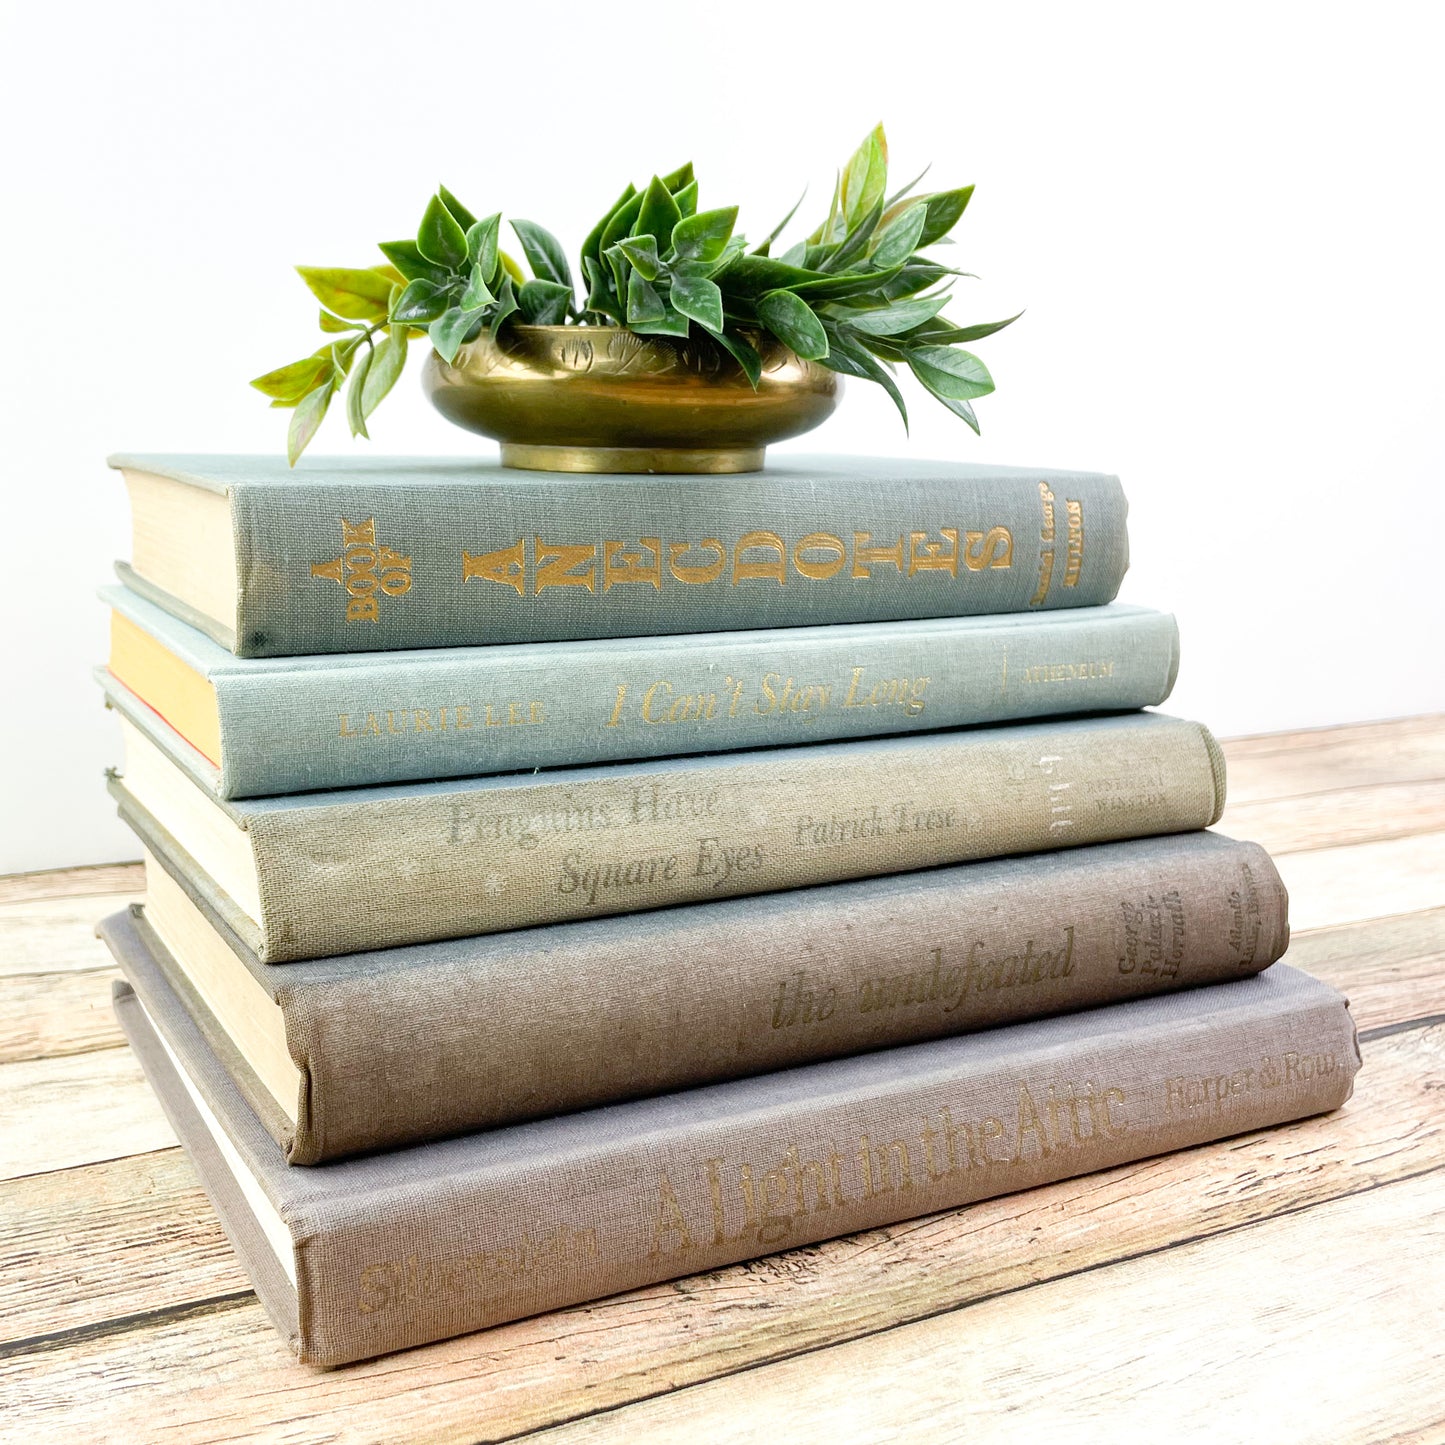 Muted Purple and Blue Books for Home Decorating